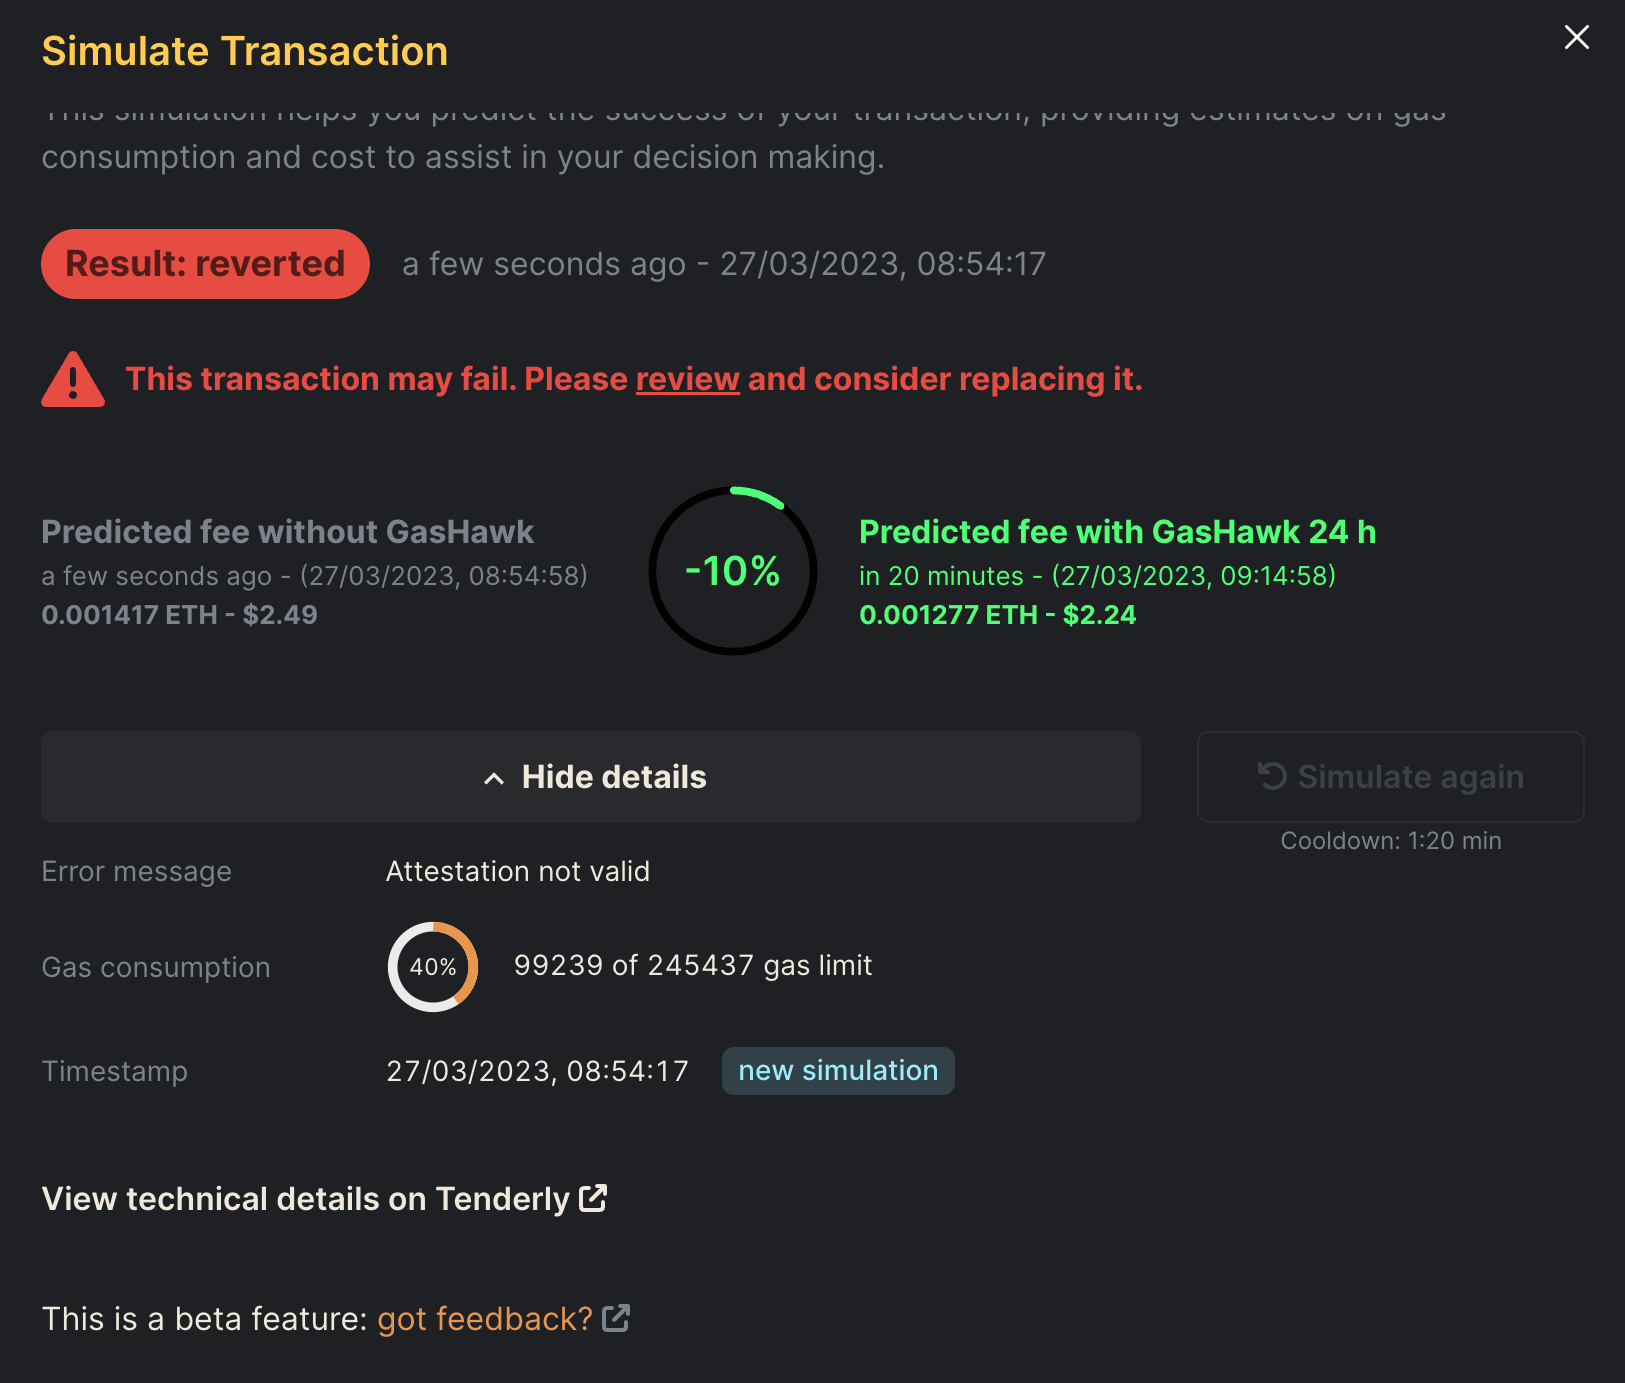 How GasHawk Brings More Value to Users With Transaction Simulations